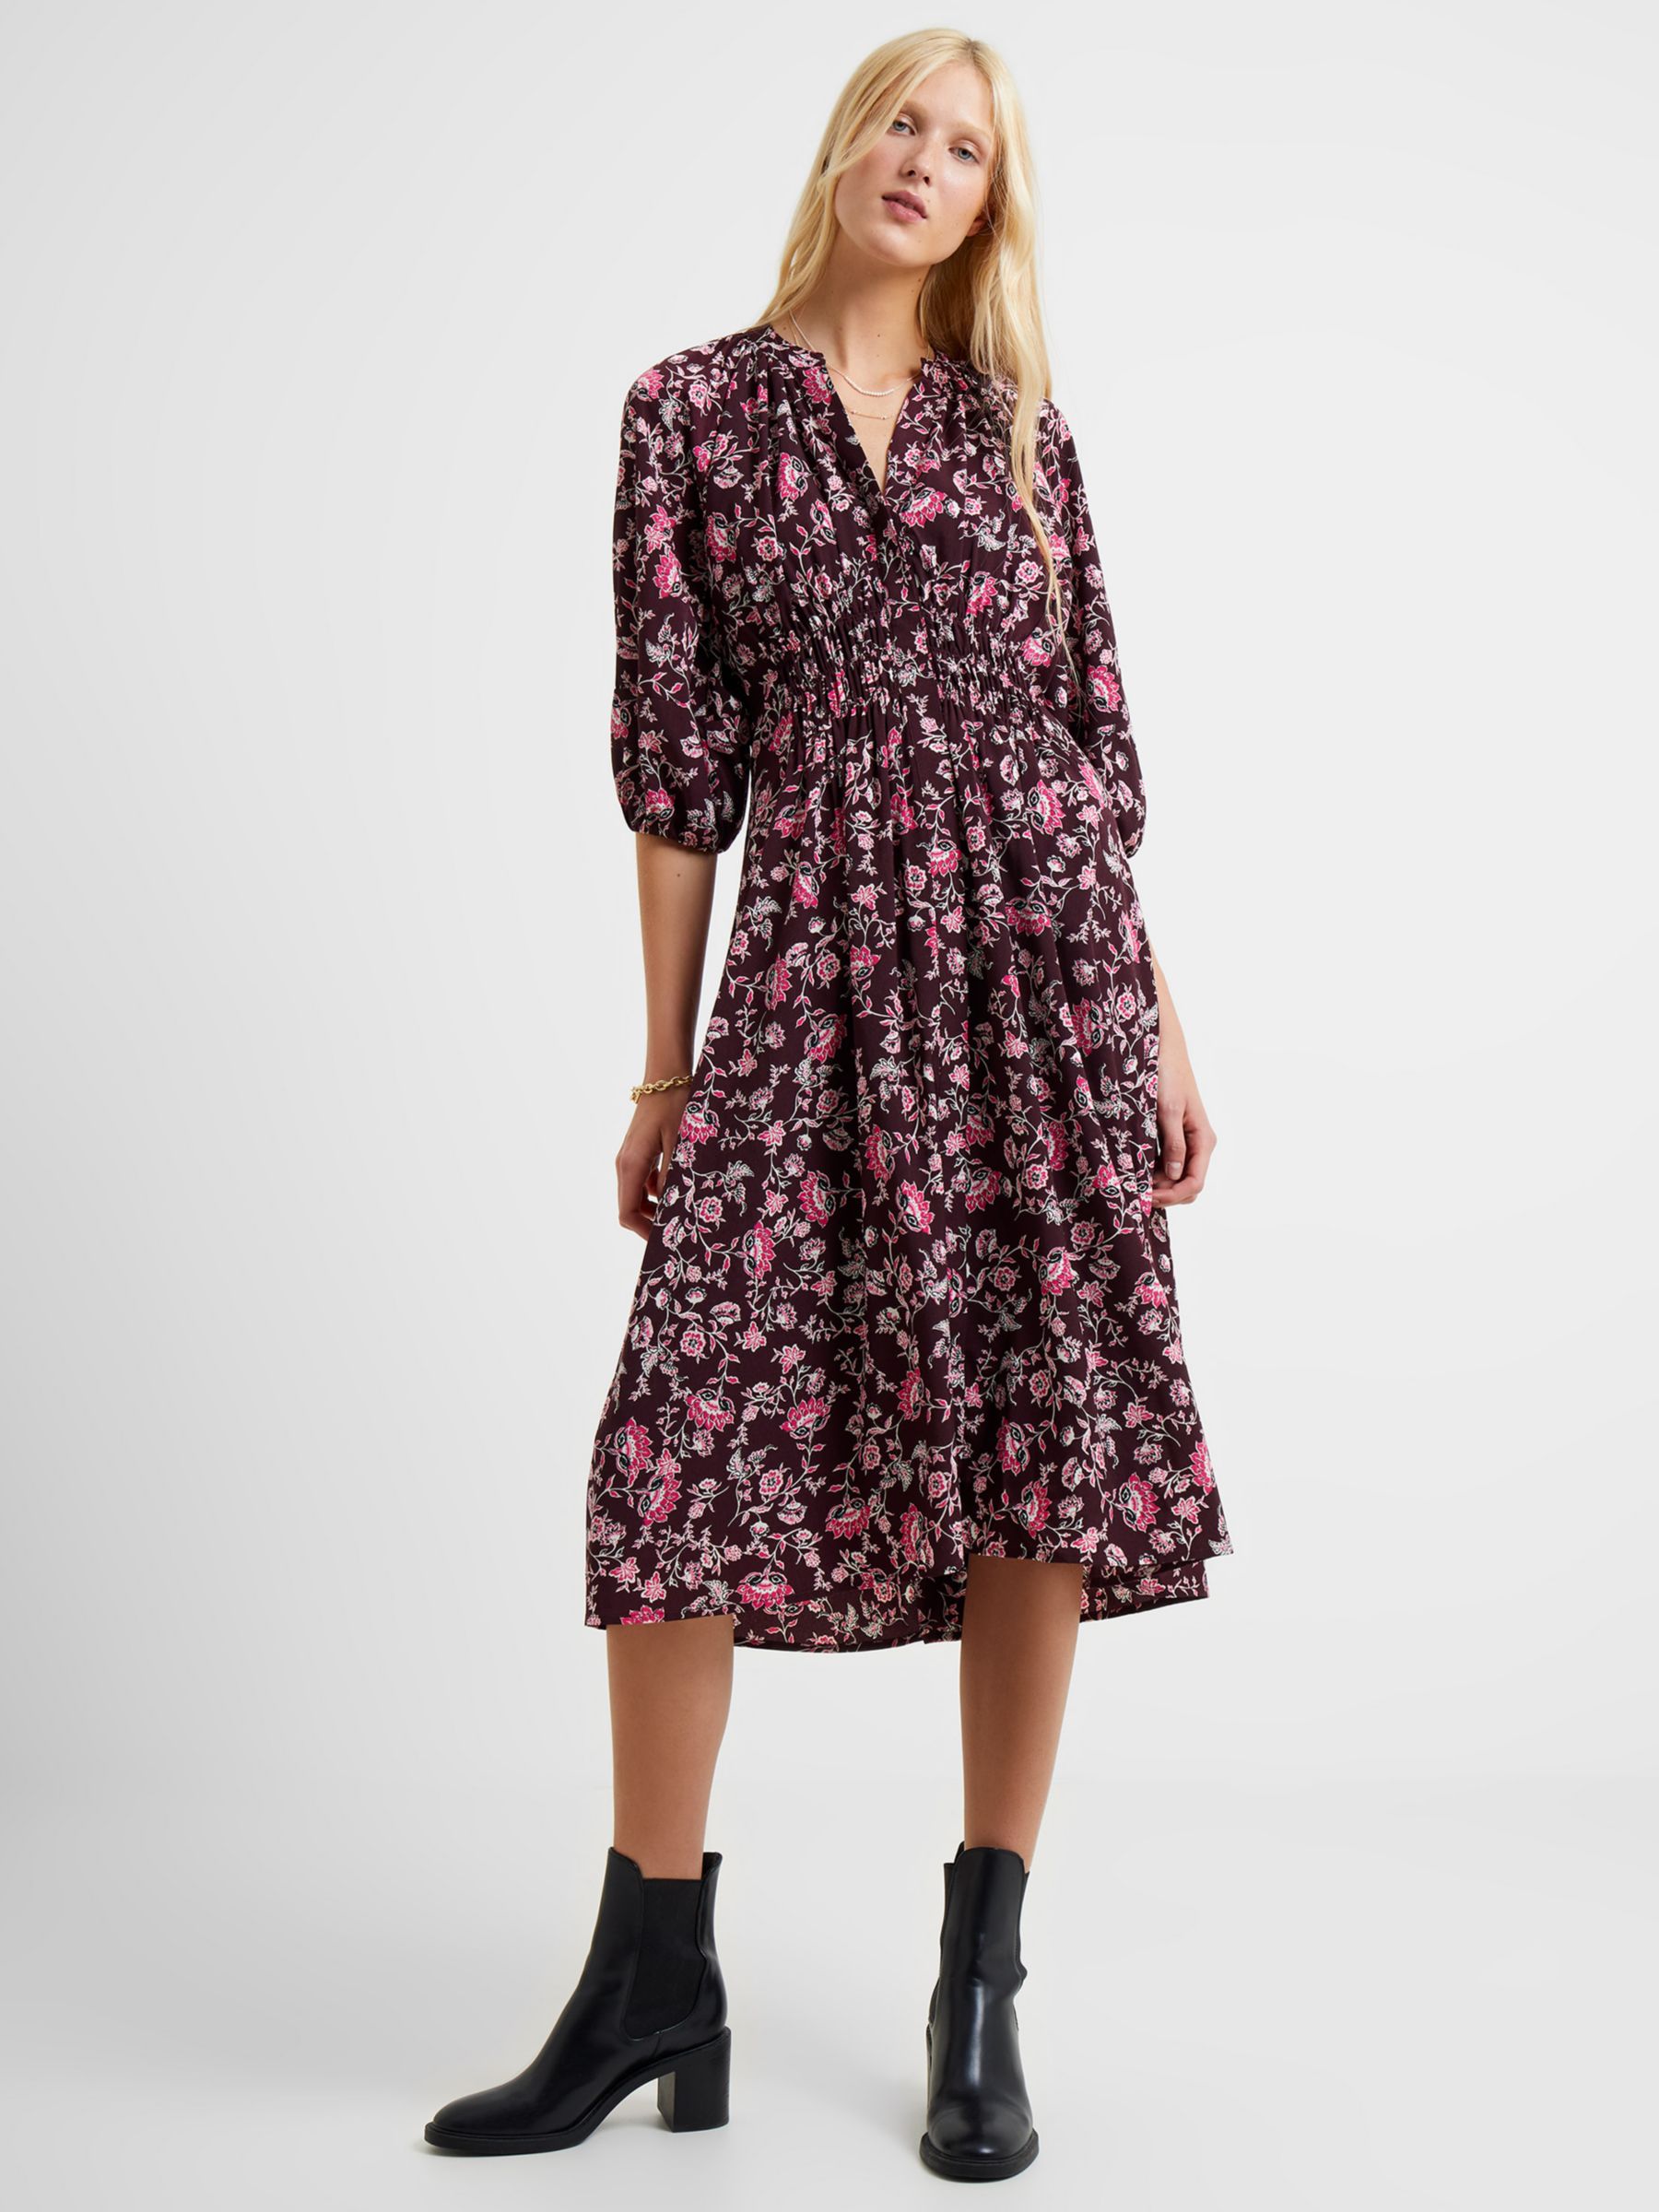 Blue/Multi Midnight Meadow Floral Dress, WHISTLES